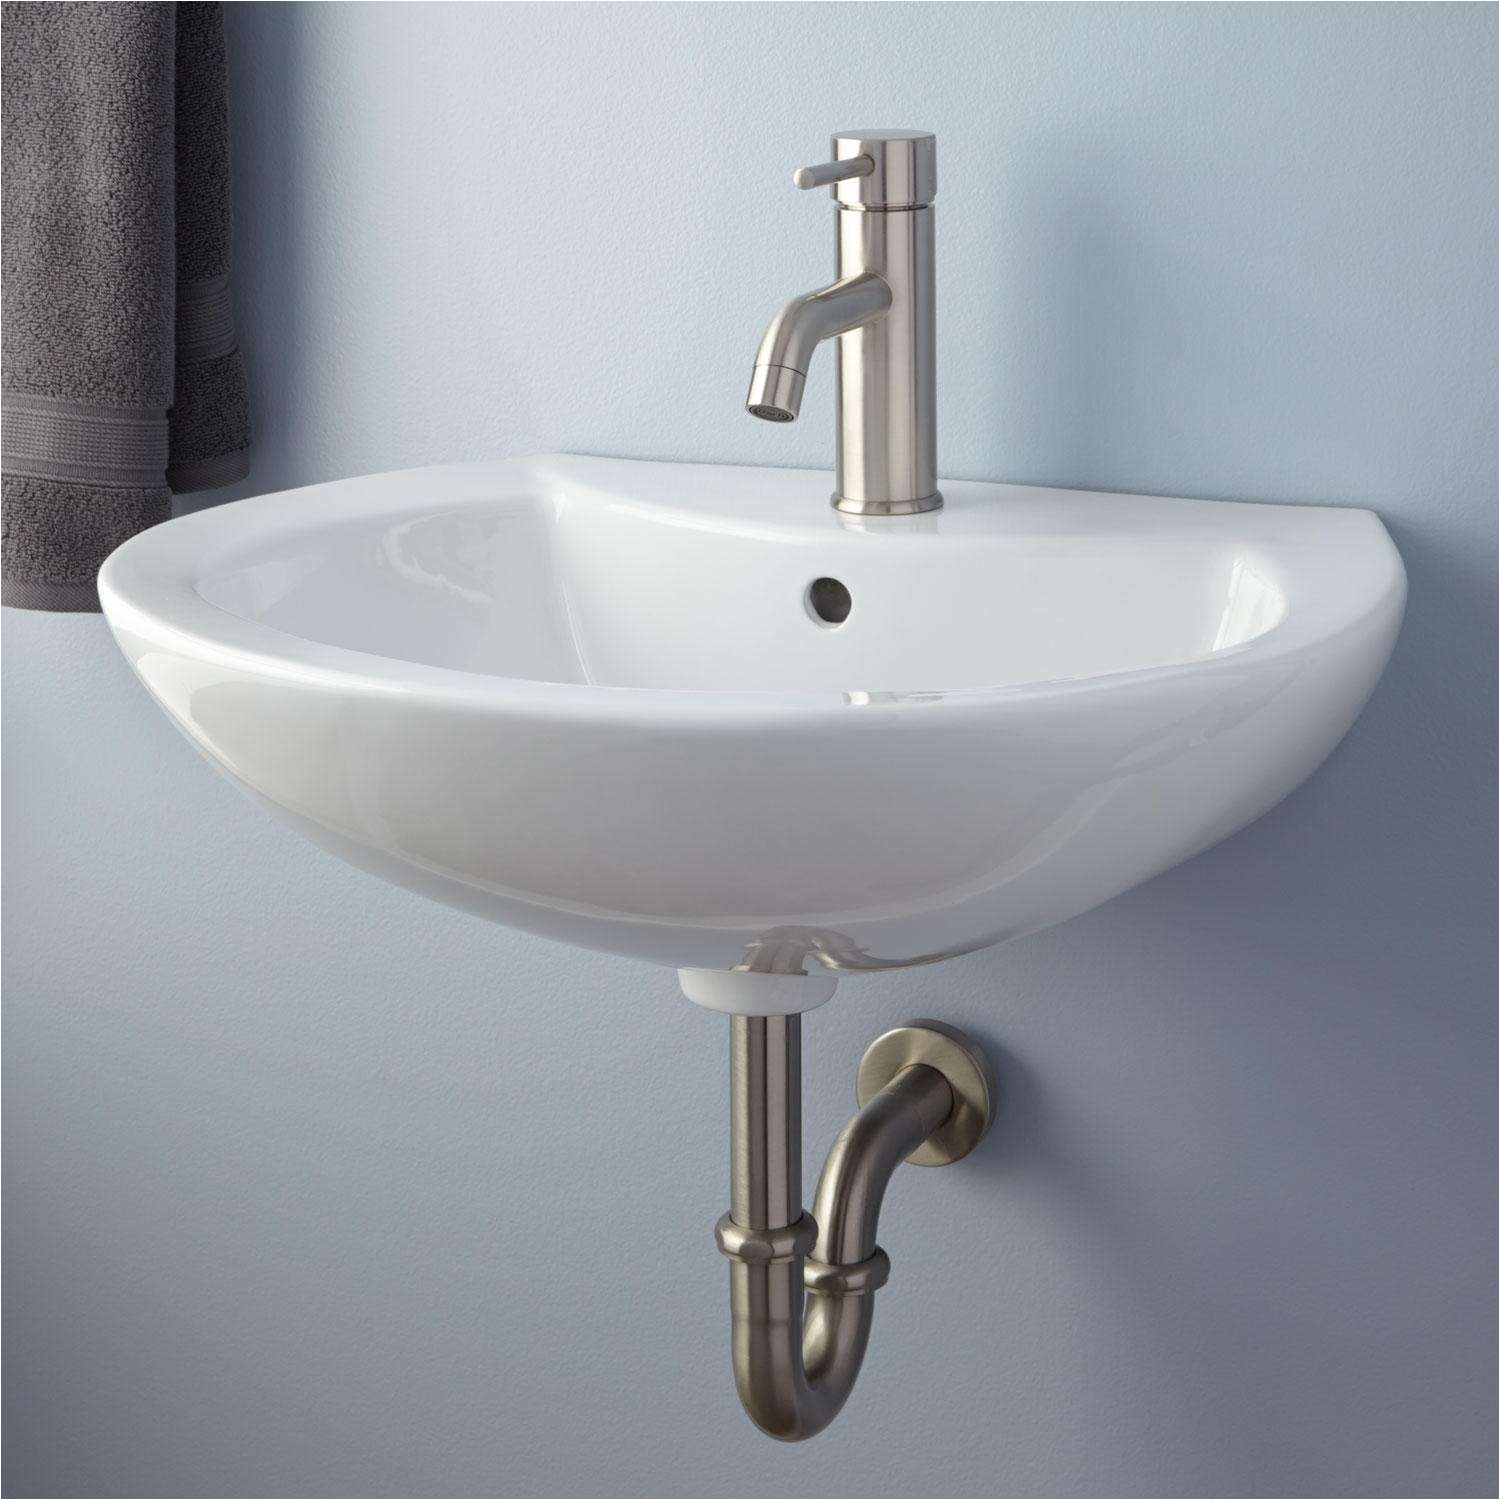 Gray Bathroom Accessories Awesome L Oval Vessel Sink White 2h Bathroom Basin Sinks 139 95i 0d Design